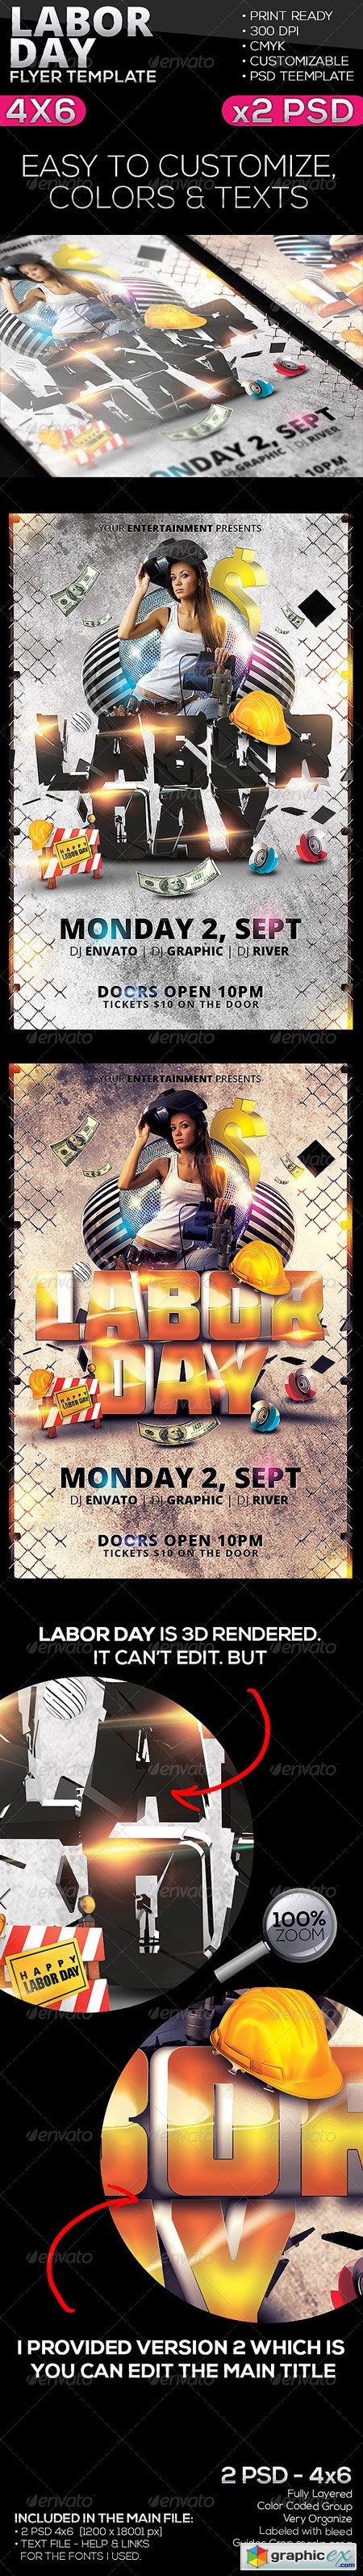 Labor Day Flyer Template 5415310